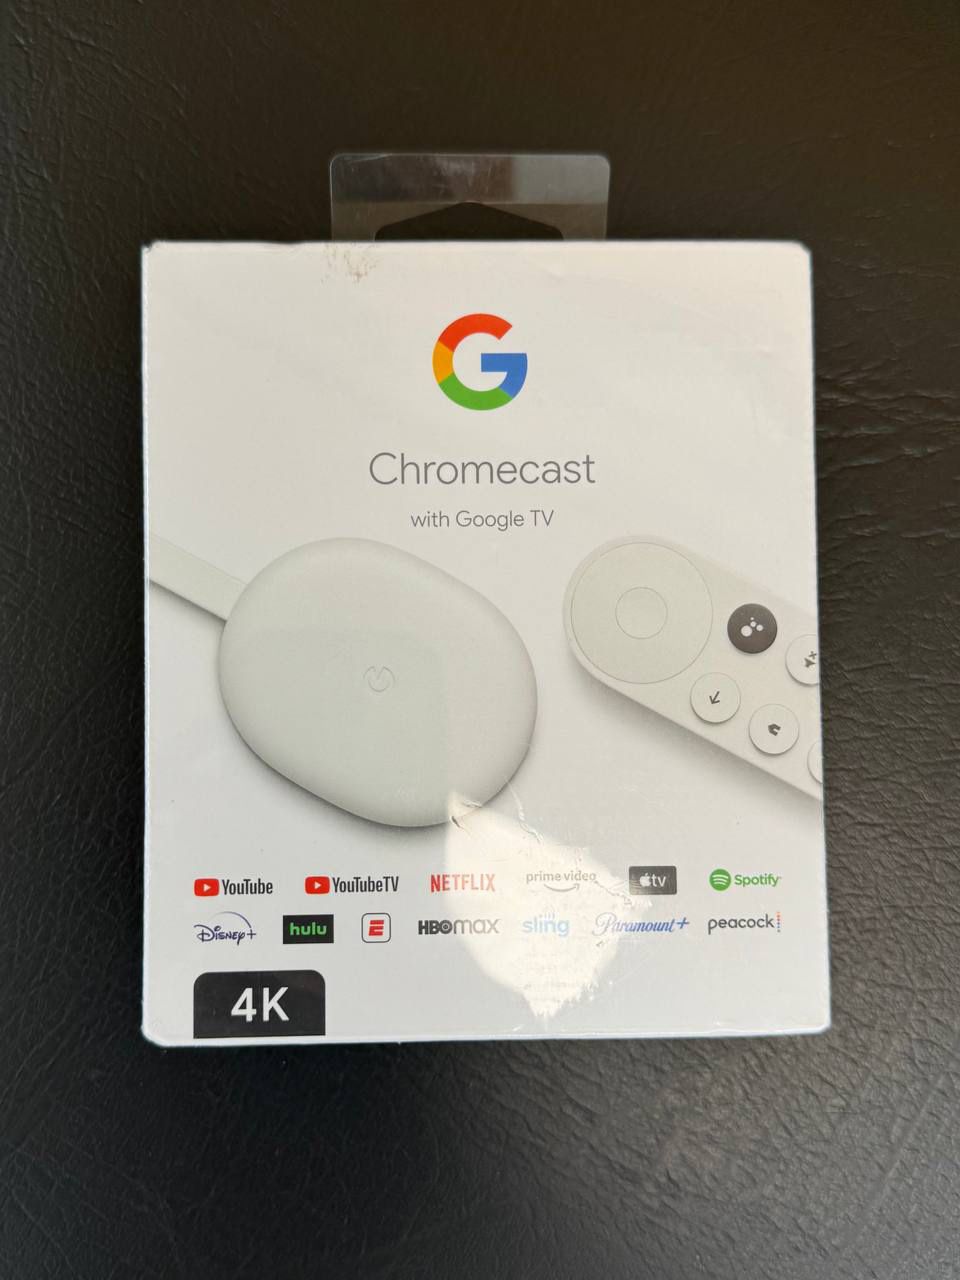 Google Chromecast with Google TV - Streaming Media Player in 4K HDR - Snow - New